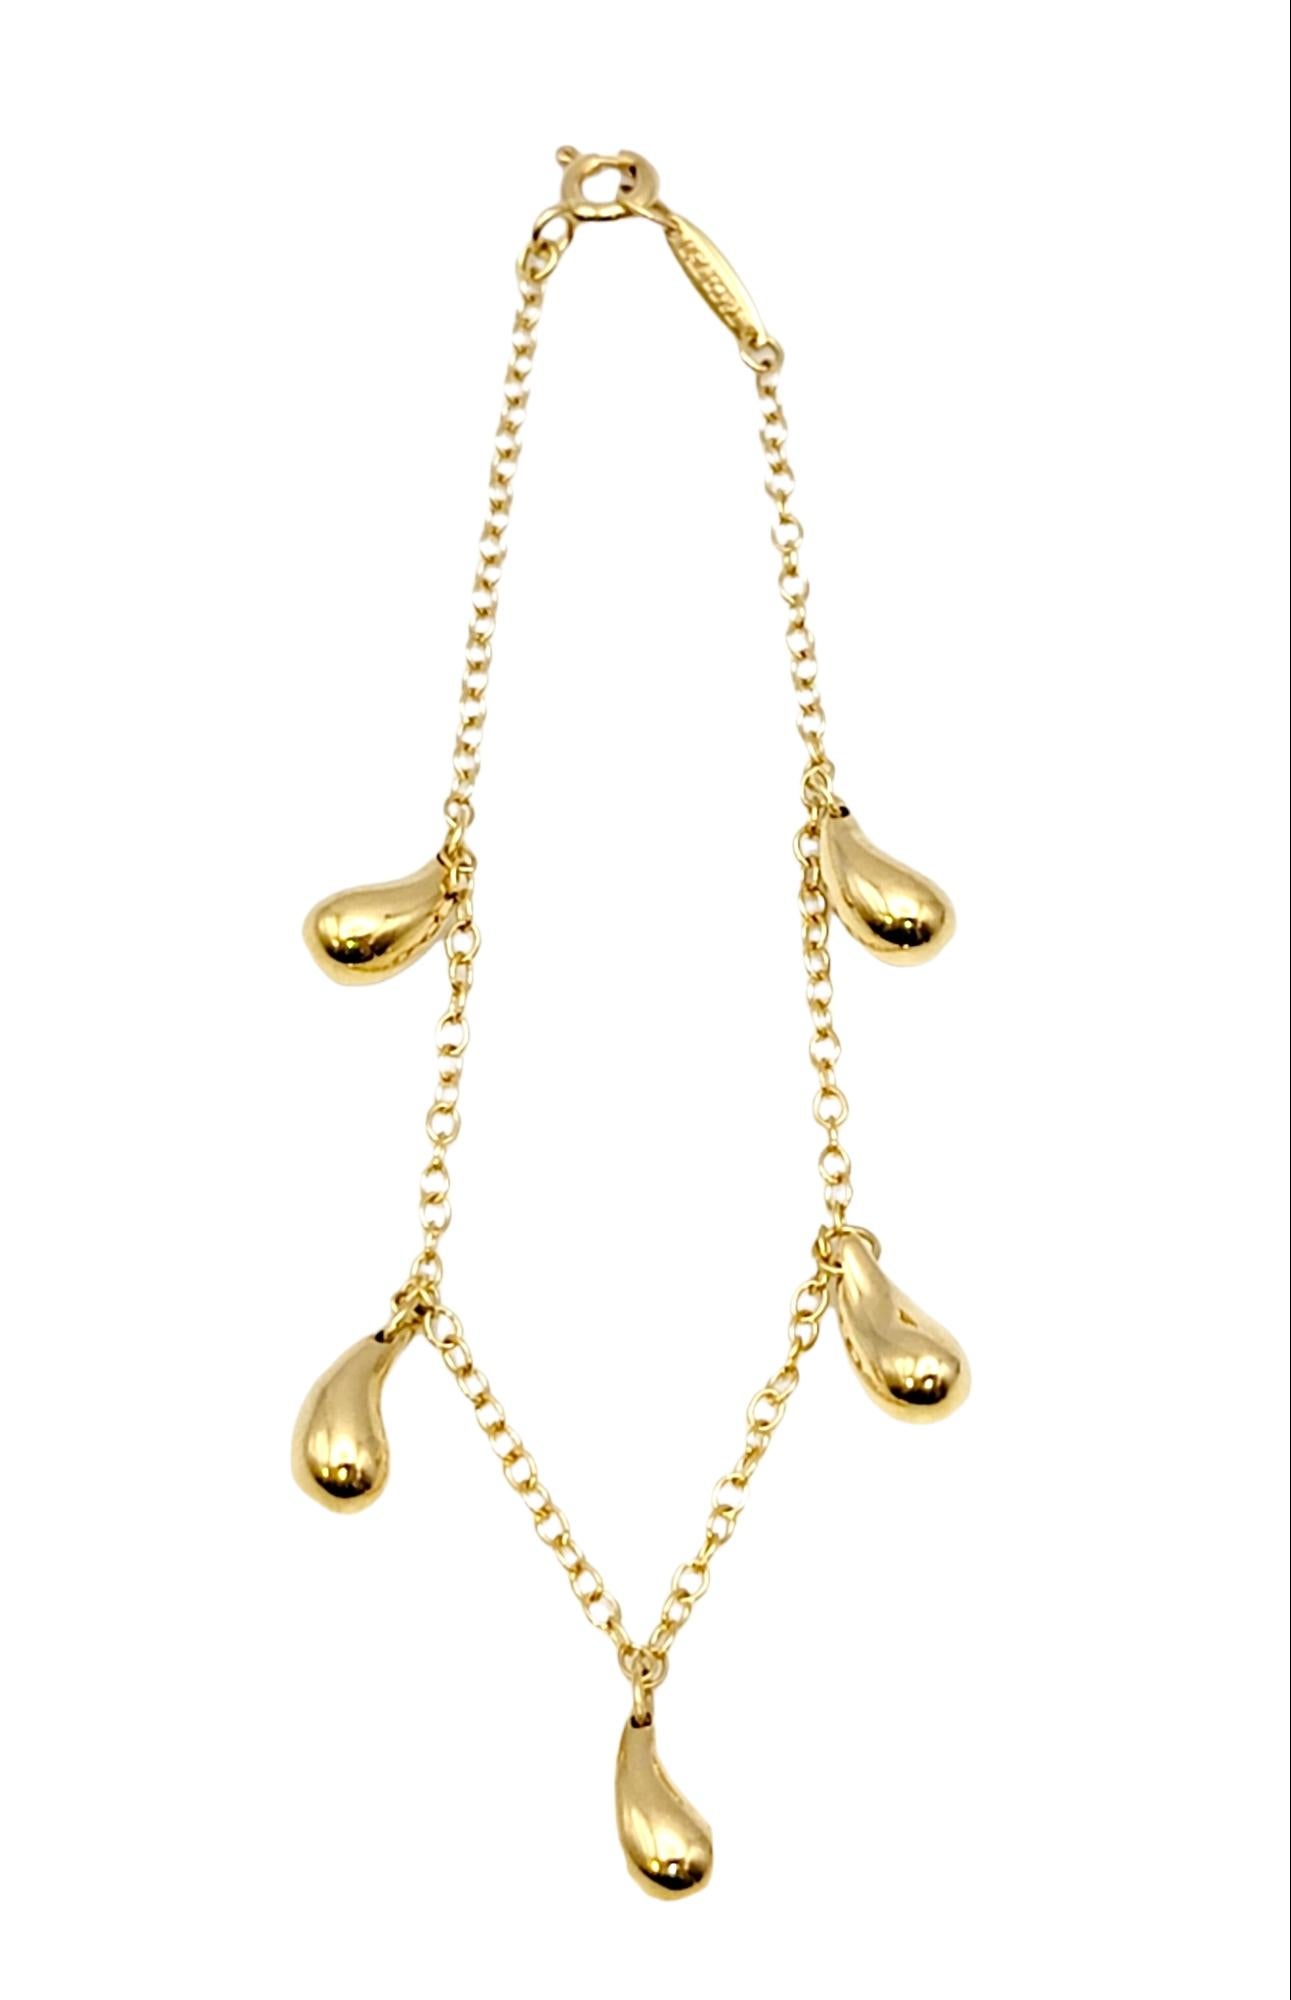 Delicate contemporary station bracelet designed by Elsa Peretti for Tiffany & Co.. Featuring 5 teardrop charms/stations in a high polished 18 karat yellow gold finish. Simple yet elegant, this piece can be worn with just about everything.

Metal: